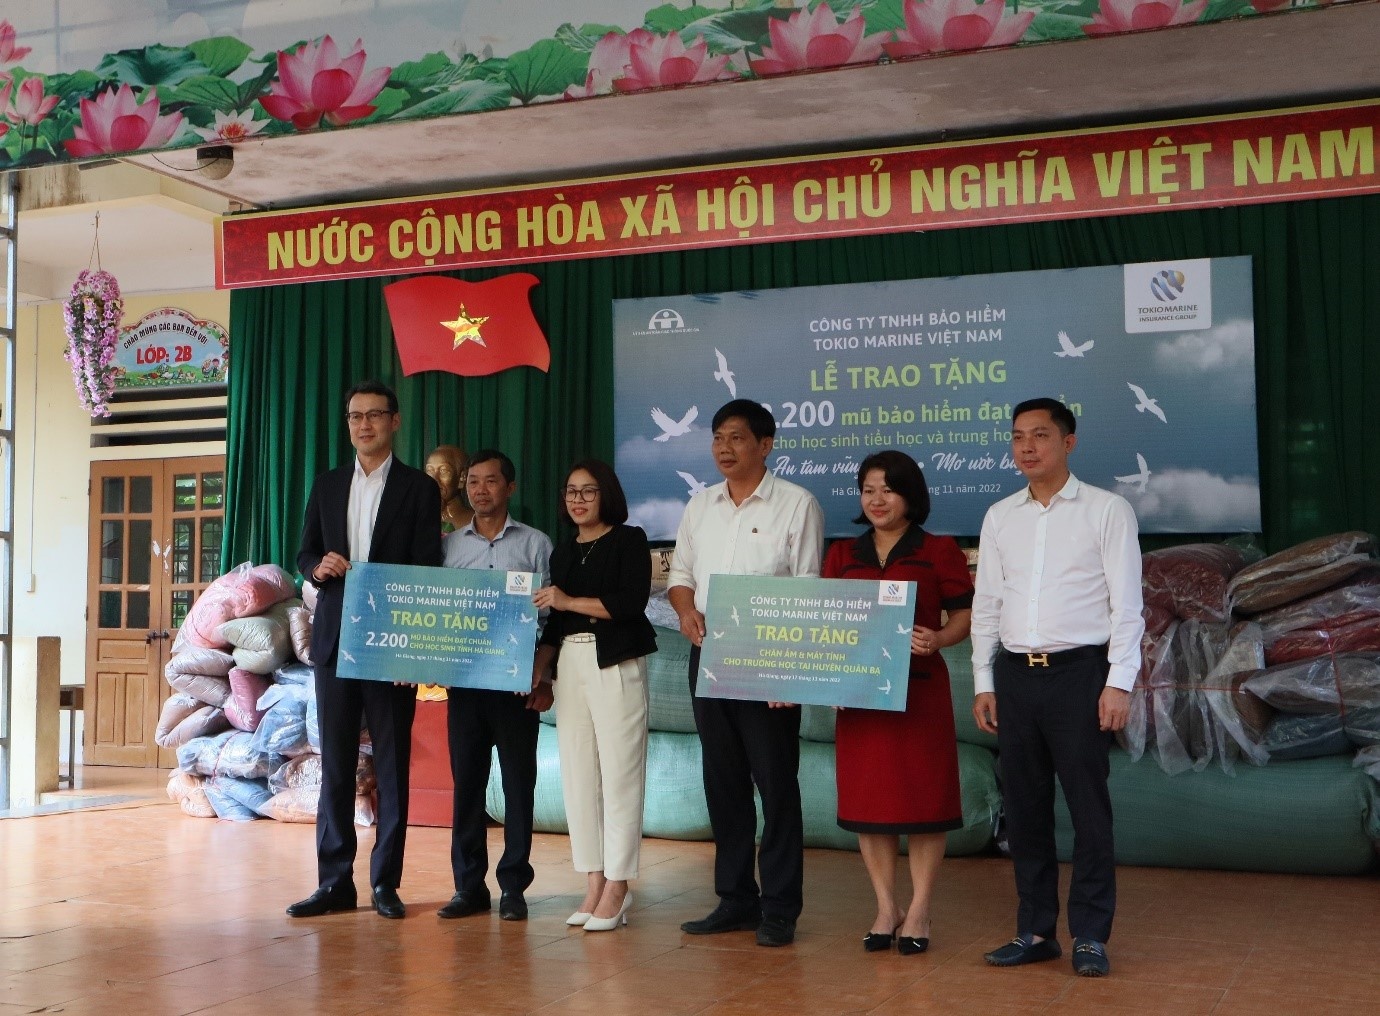 Shinhan Life officially launches life insurance business in Vietnam